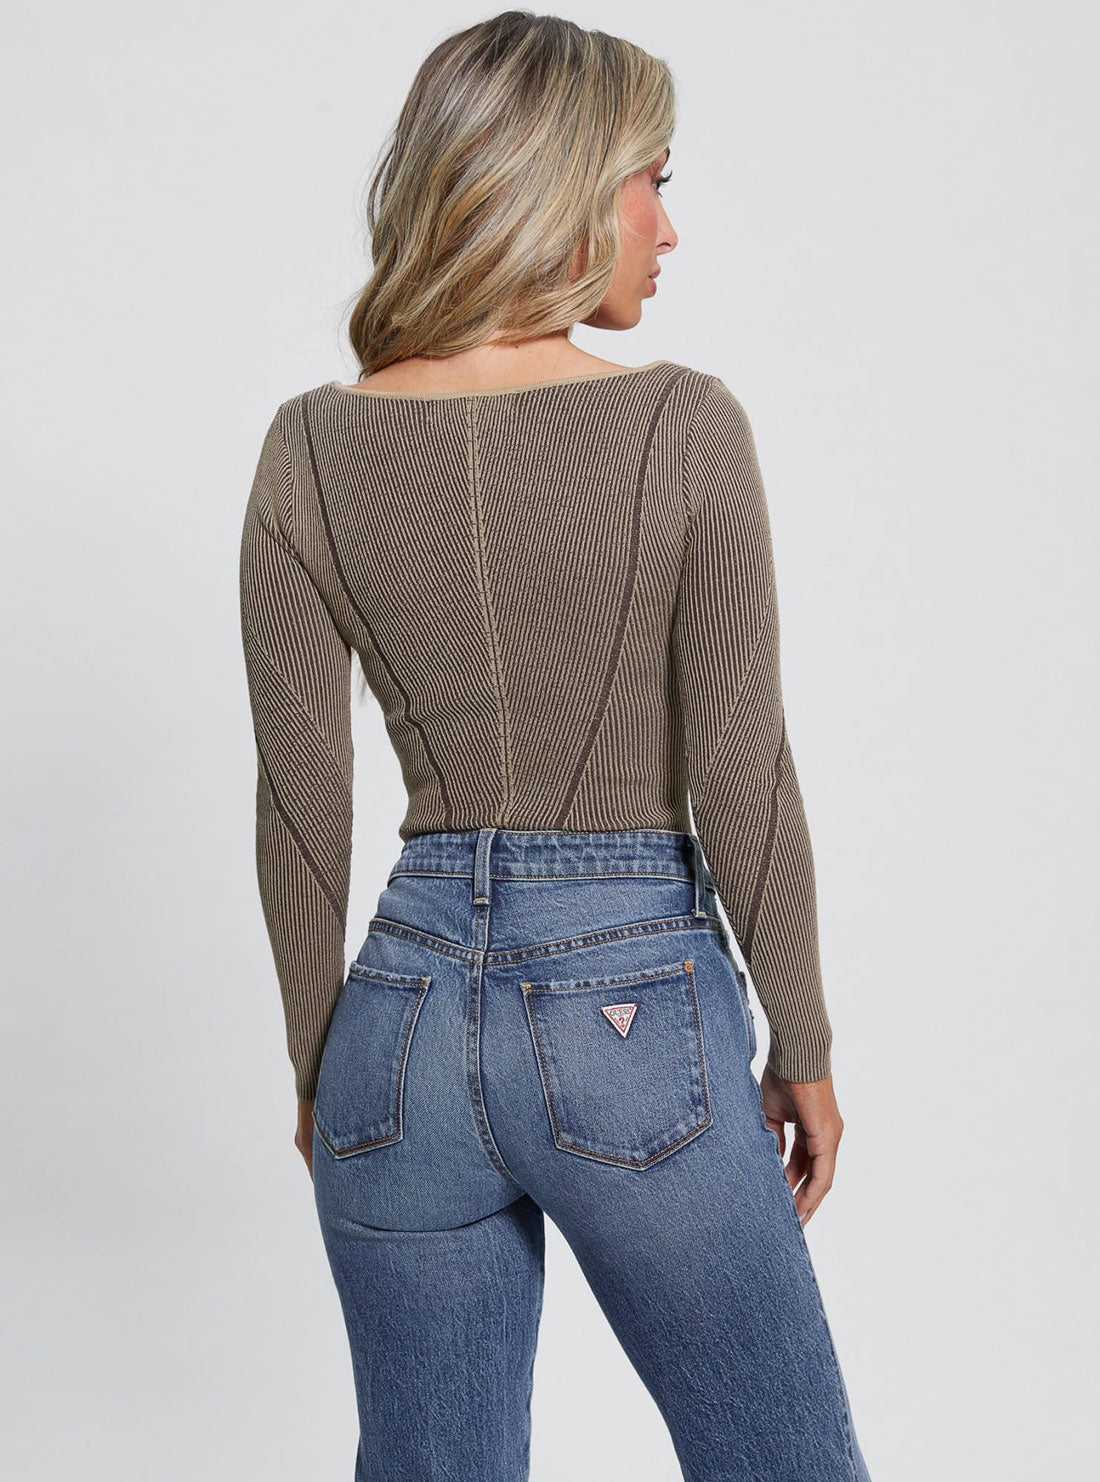 Eco Brown Blandine Knit Top | GUESS Women's Apparel | back view